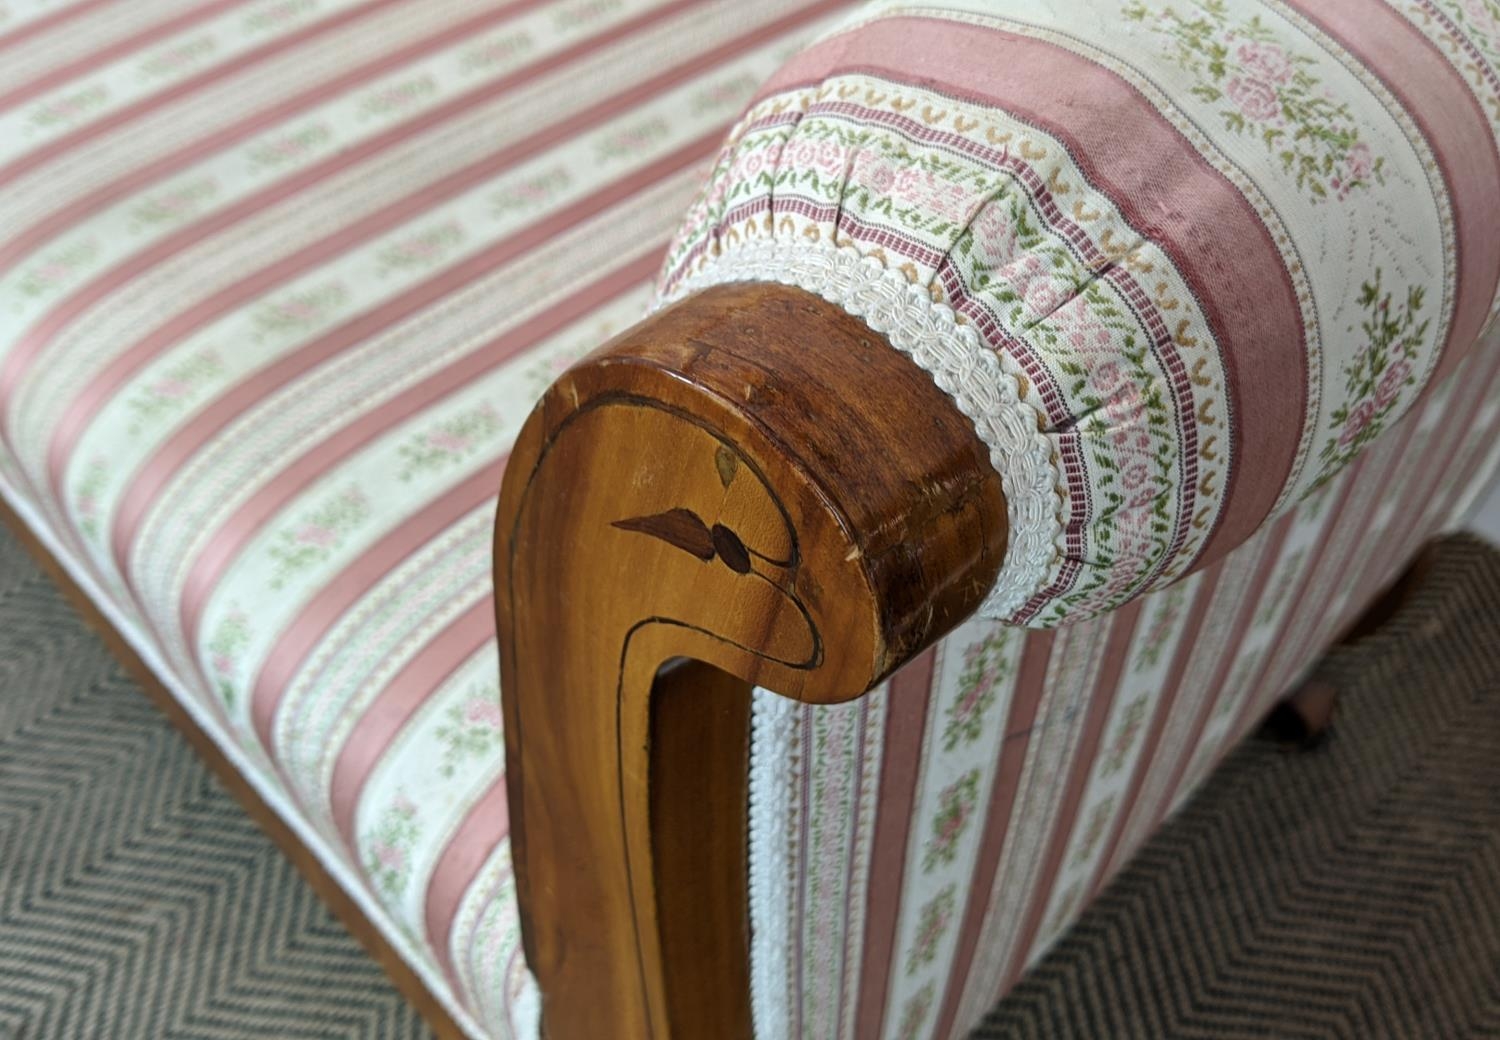 SOFA, Biedermeier cherrywood and line inlaid with pink striped upholstery, 104cm H x 168cm x 68cm. - Image 11 of 24